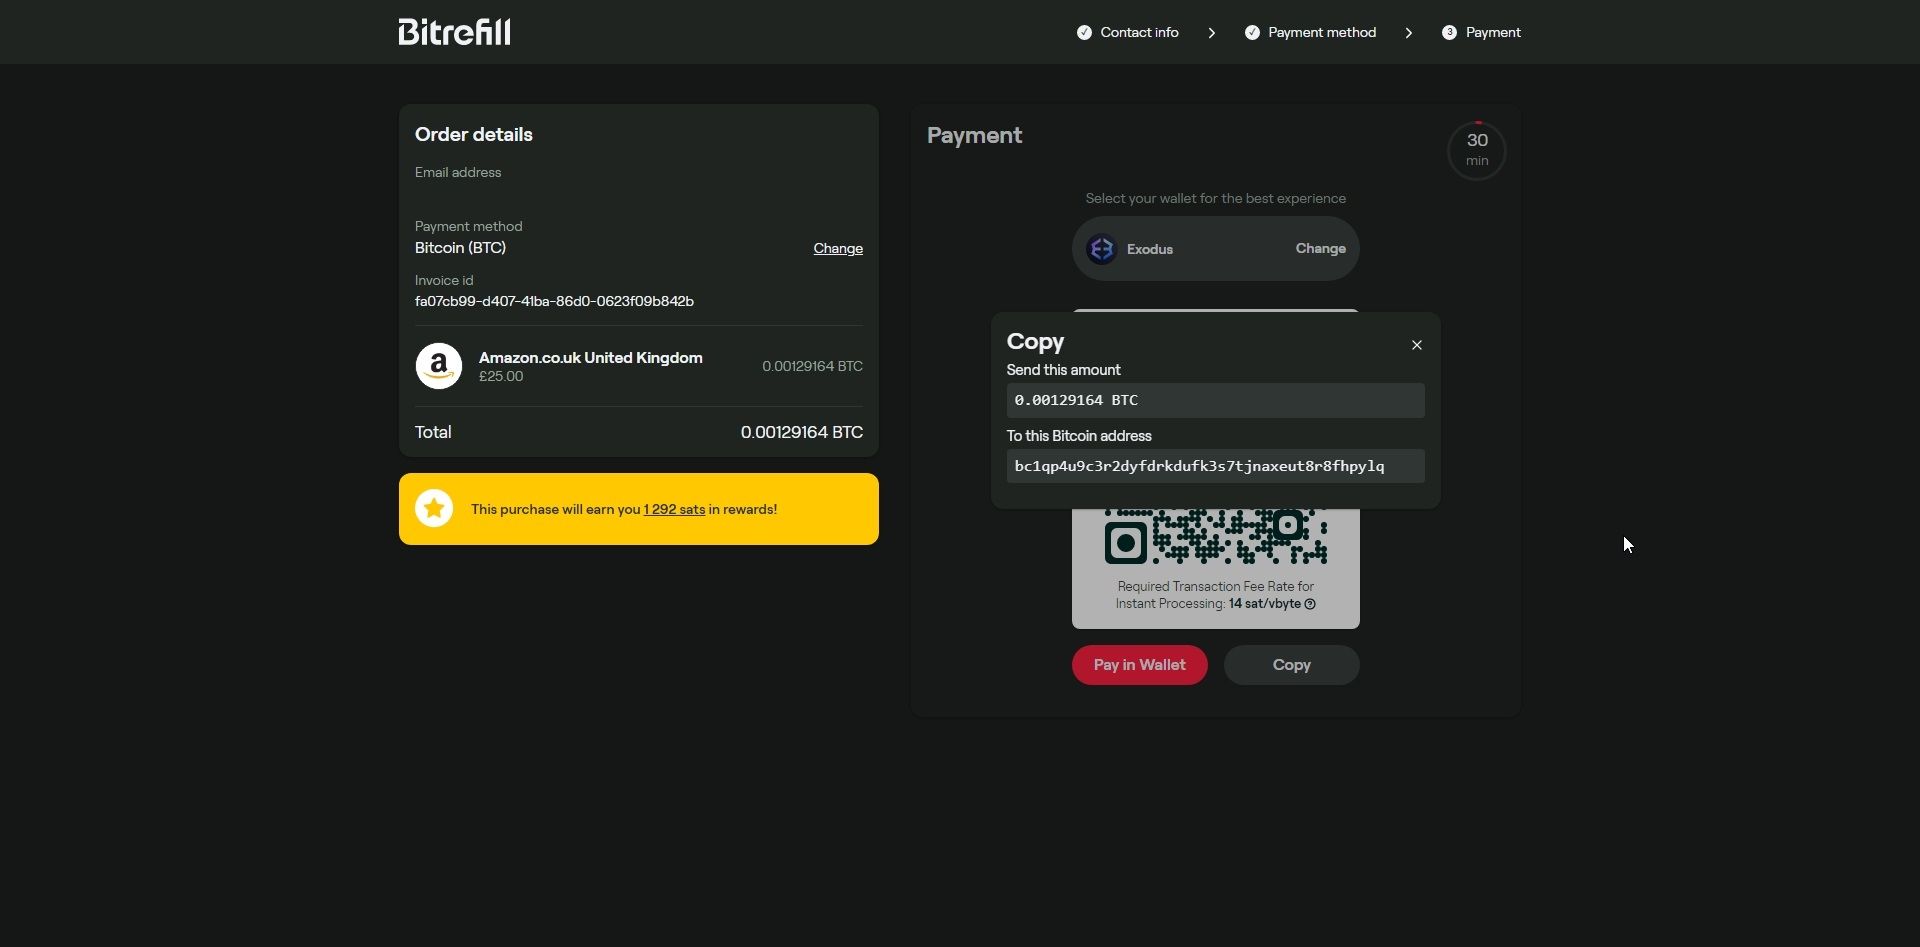 bitrefill copy payment information to bitcoin wallet